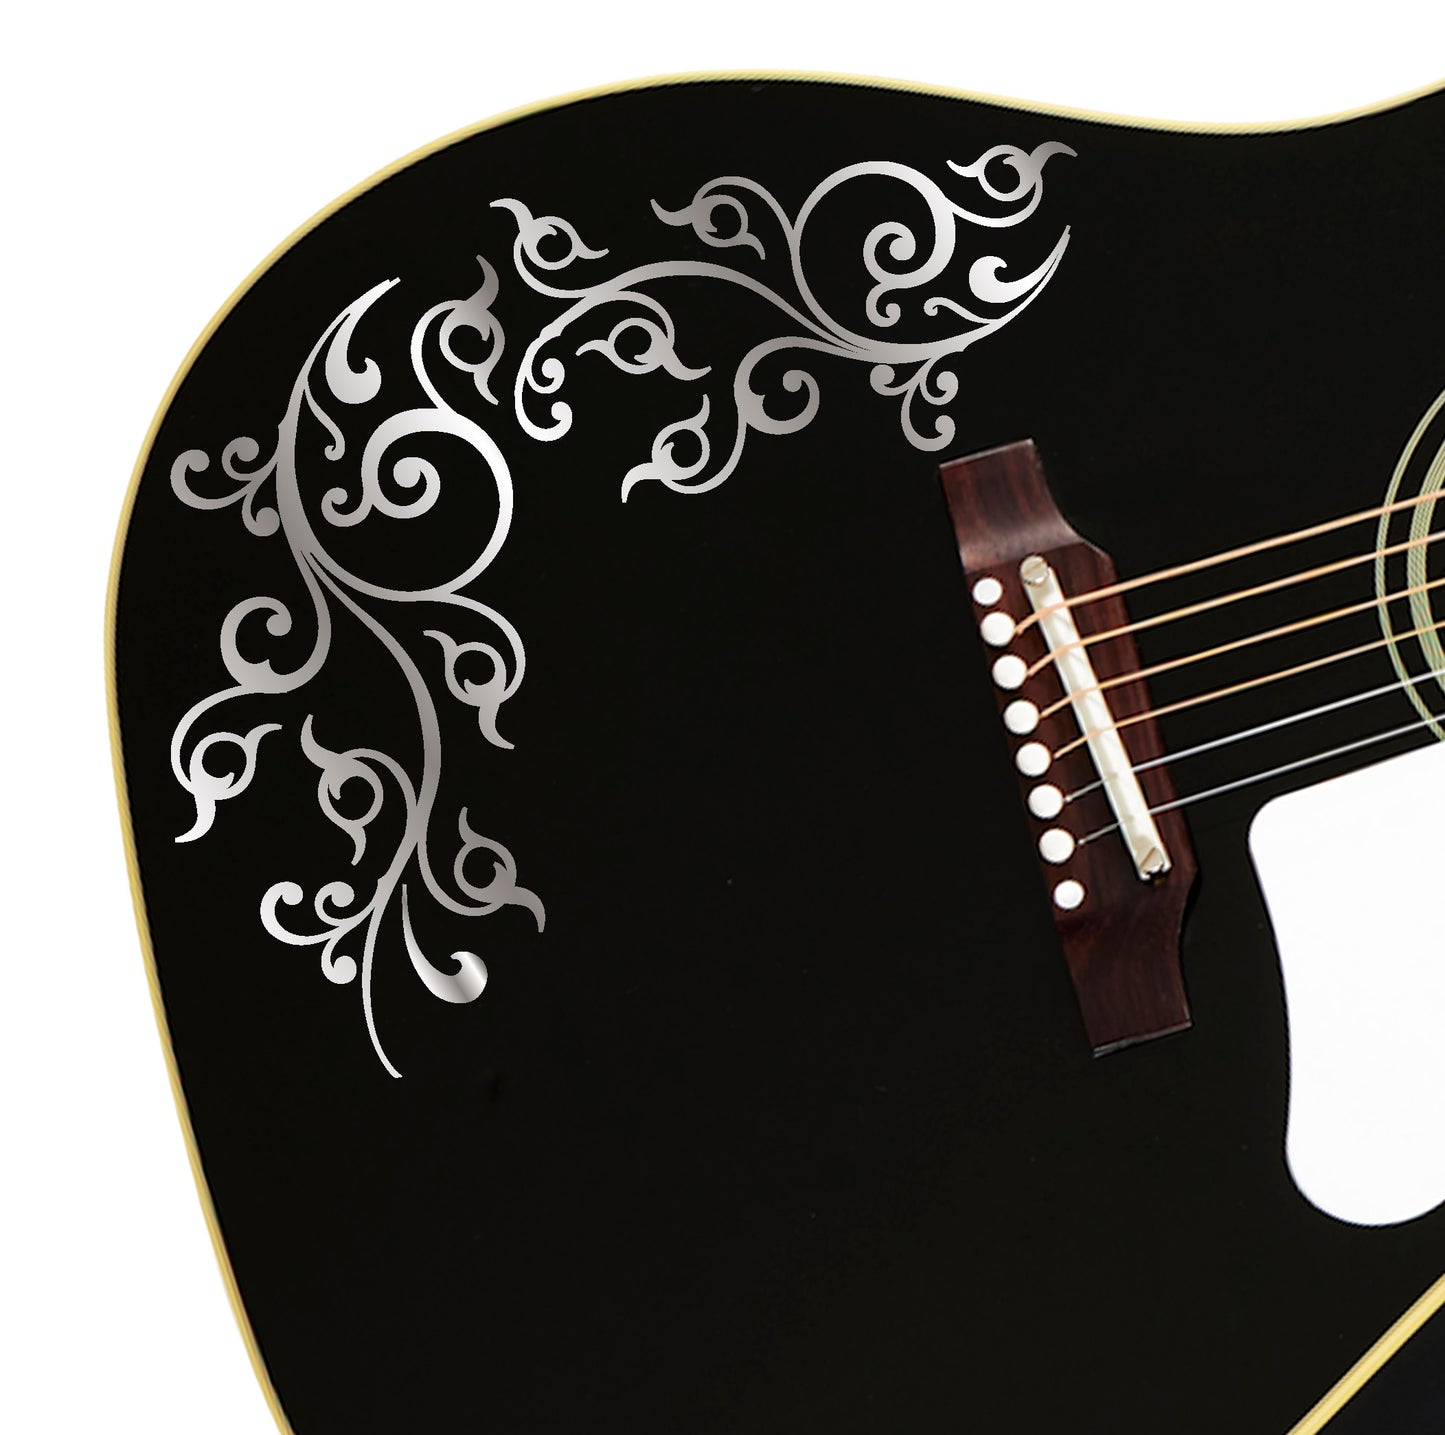 Custom Made Flower Swirl Sticker Fits Guitars & Basses. Colour Options Available.